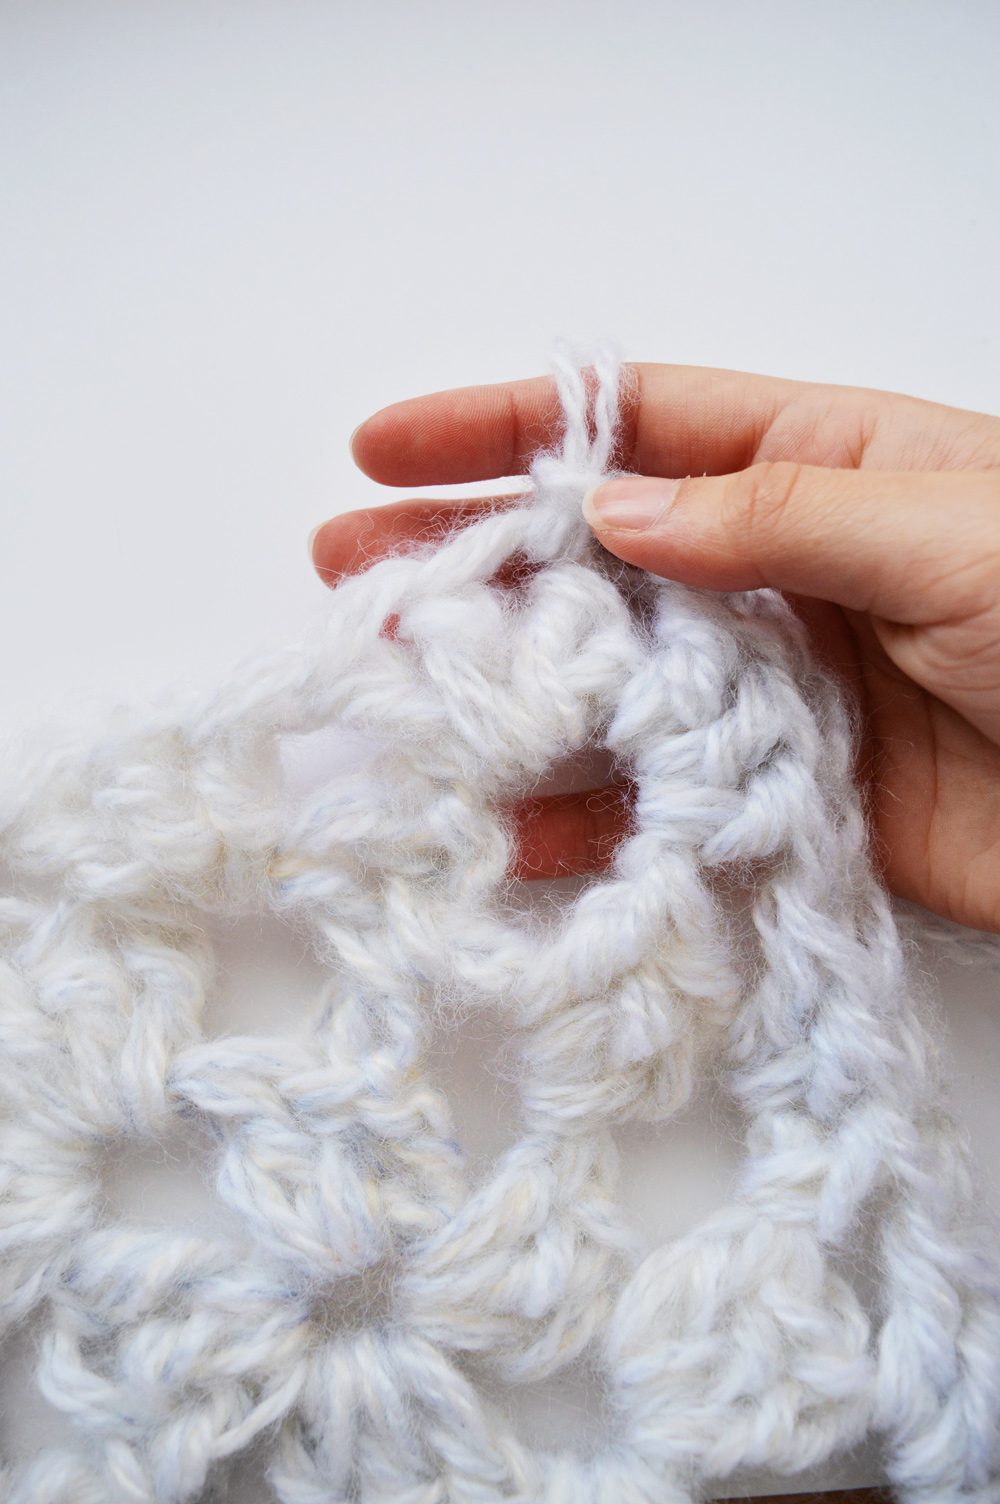 Finger crochet projects to get started